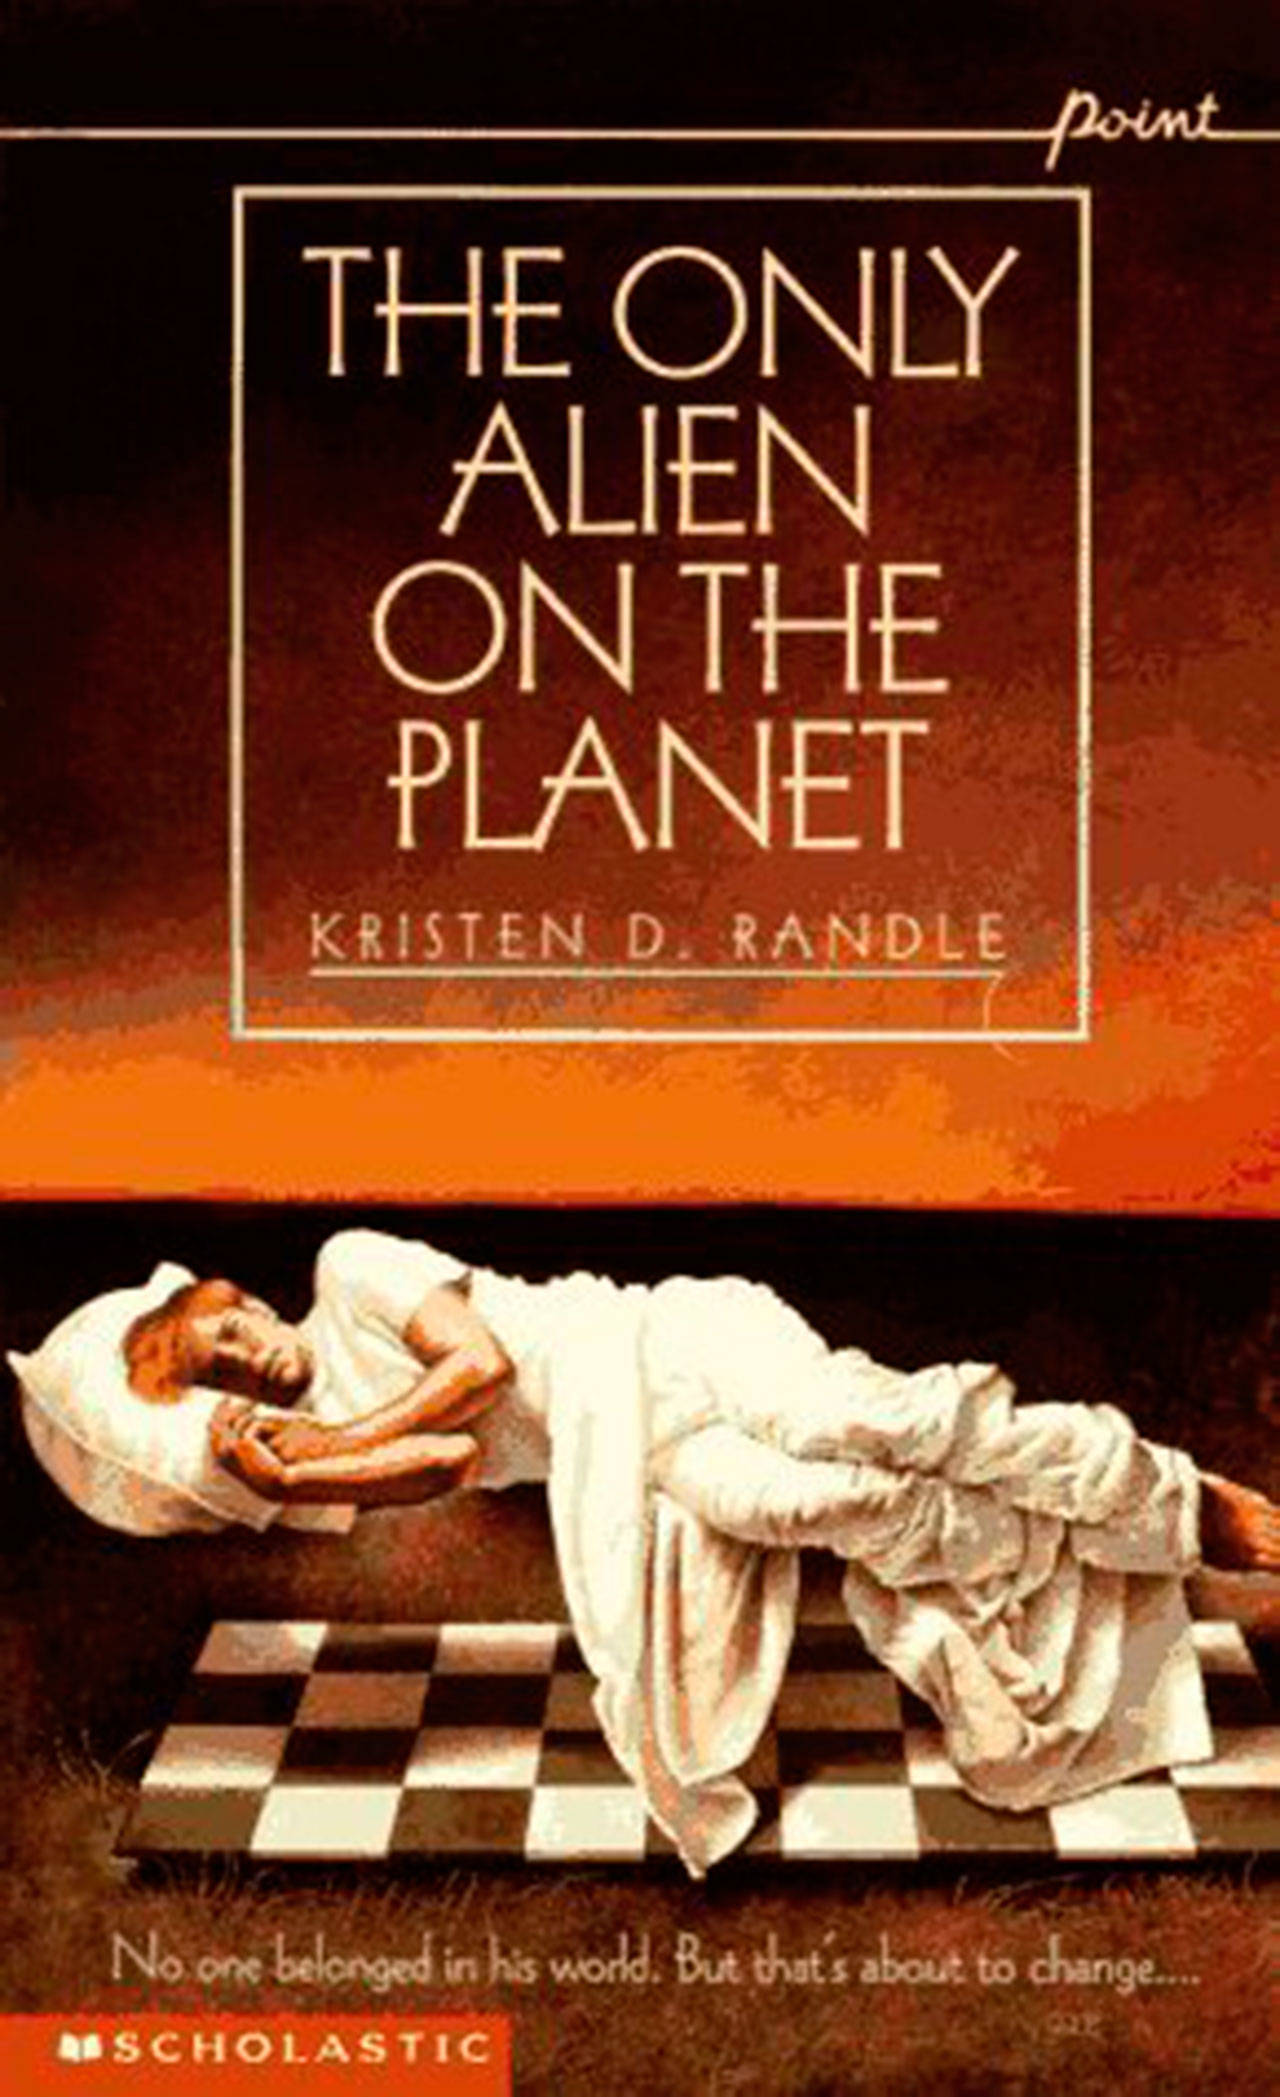 “The Only Alien on the Planet” by Kristen Randle